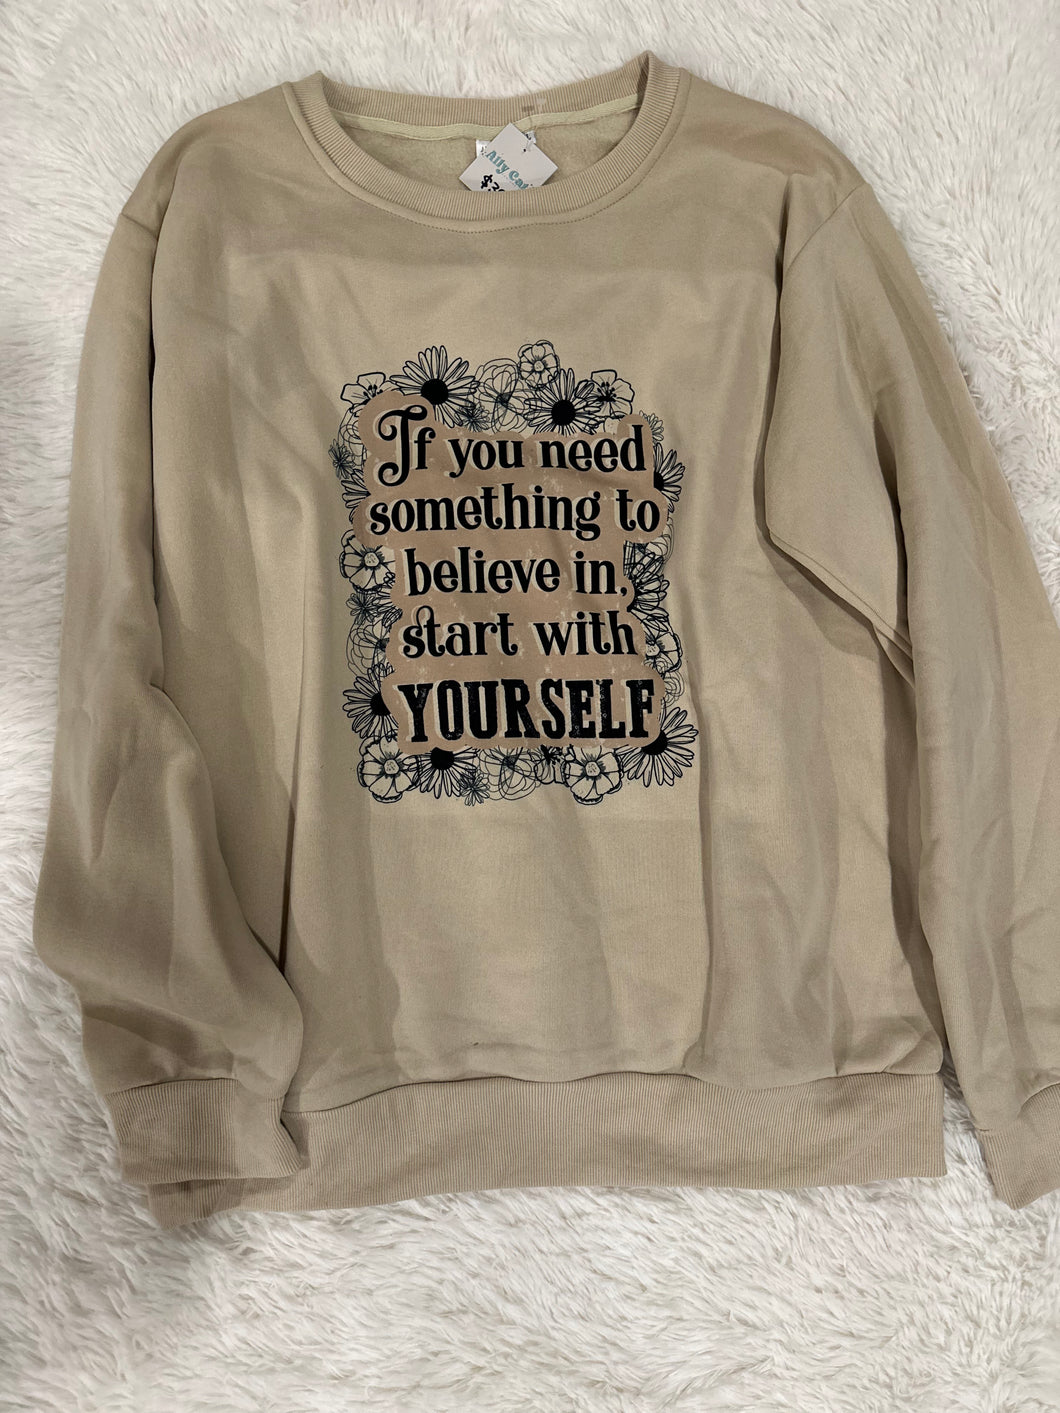 If you need something to believe in, start with yourself - Size XL